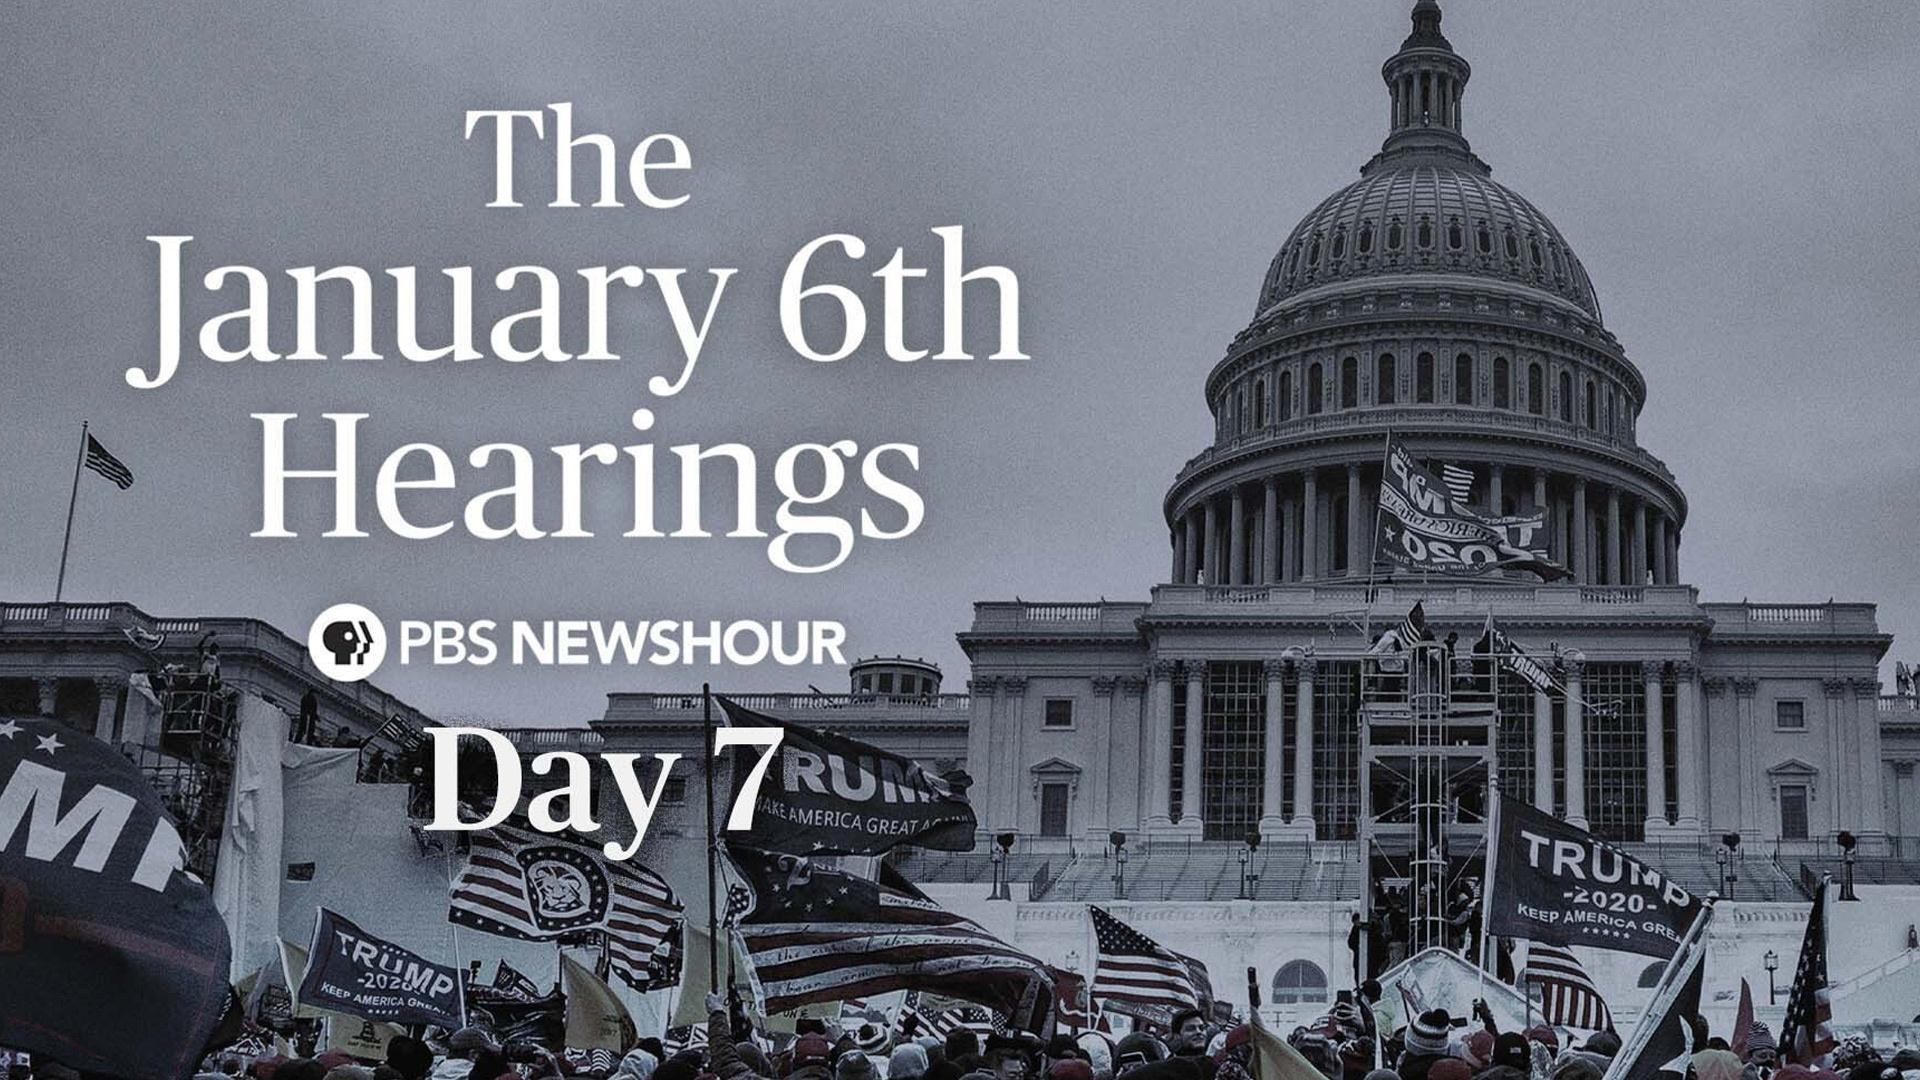 The January 6th Hearings - Day 7